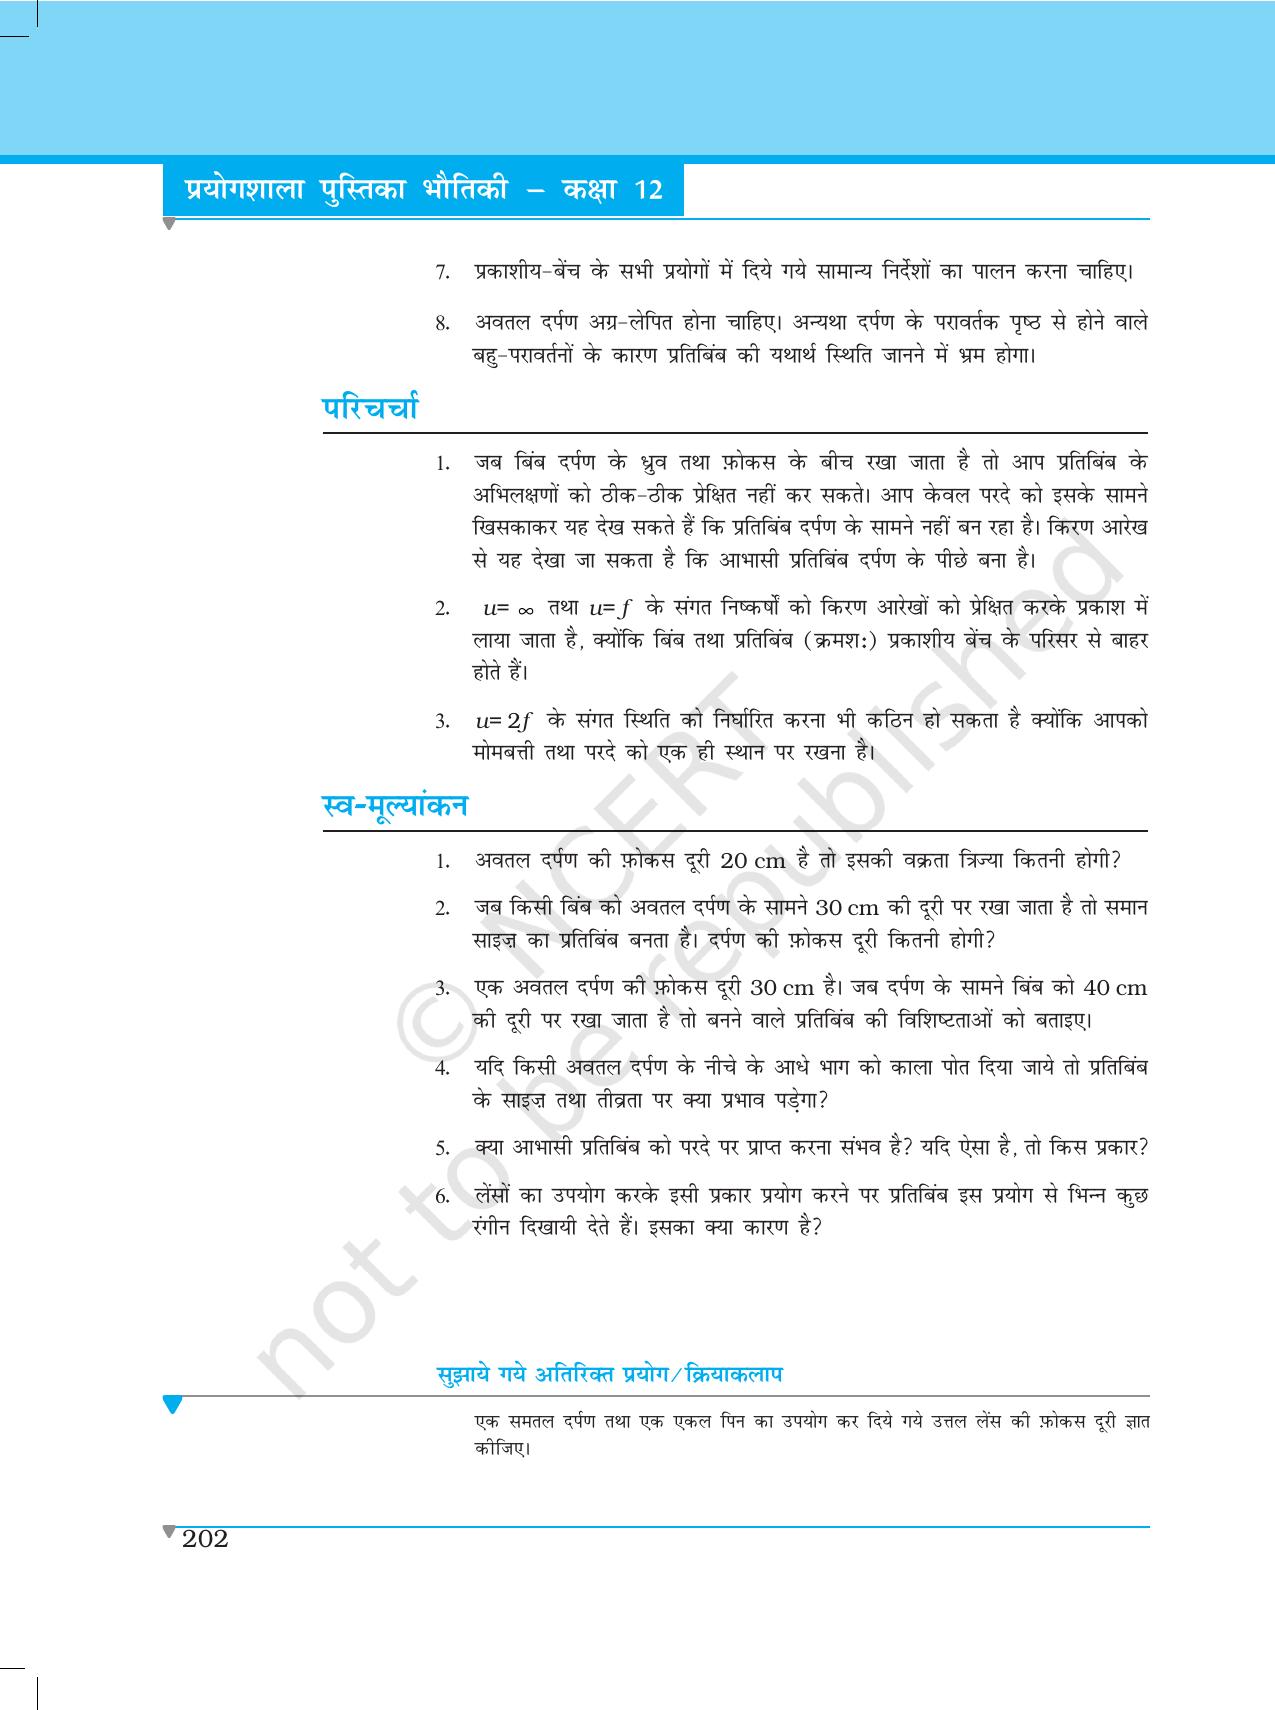 NCERT Laboratory Manuals for Class XII भौतिकी - क्रियाकलाप (12 - 14) - Page 13